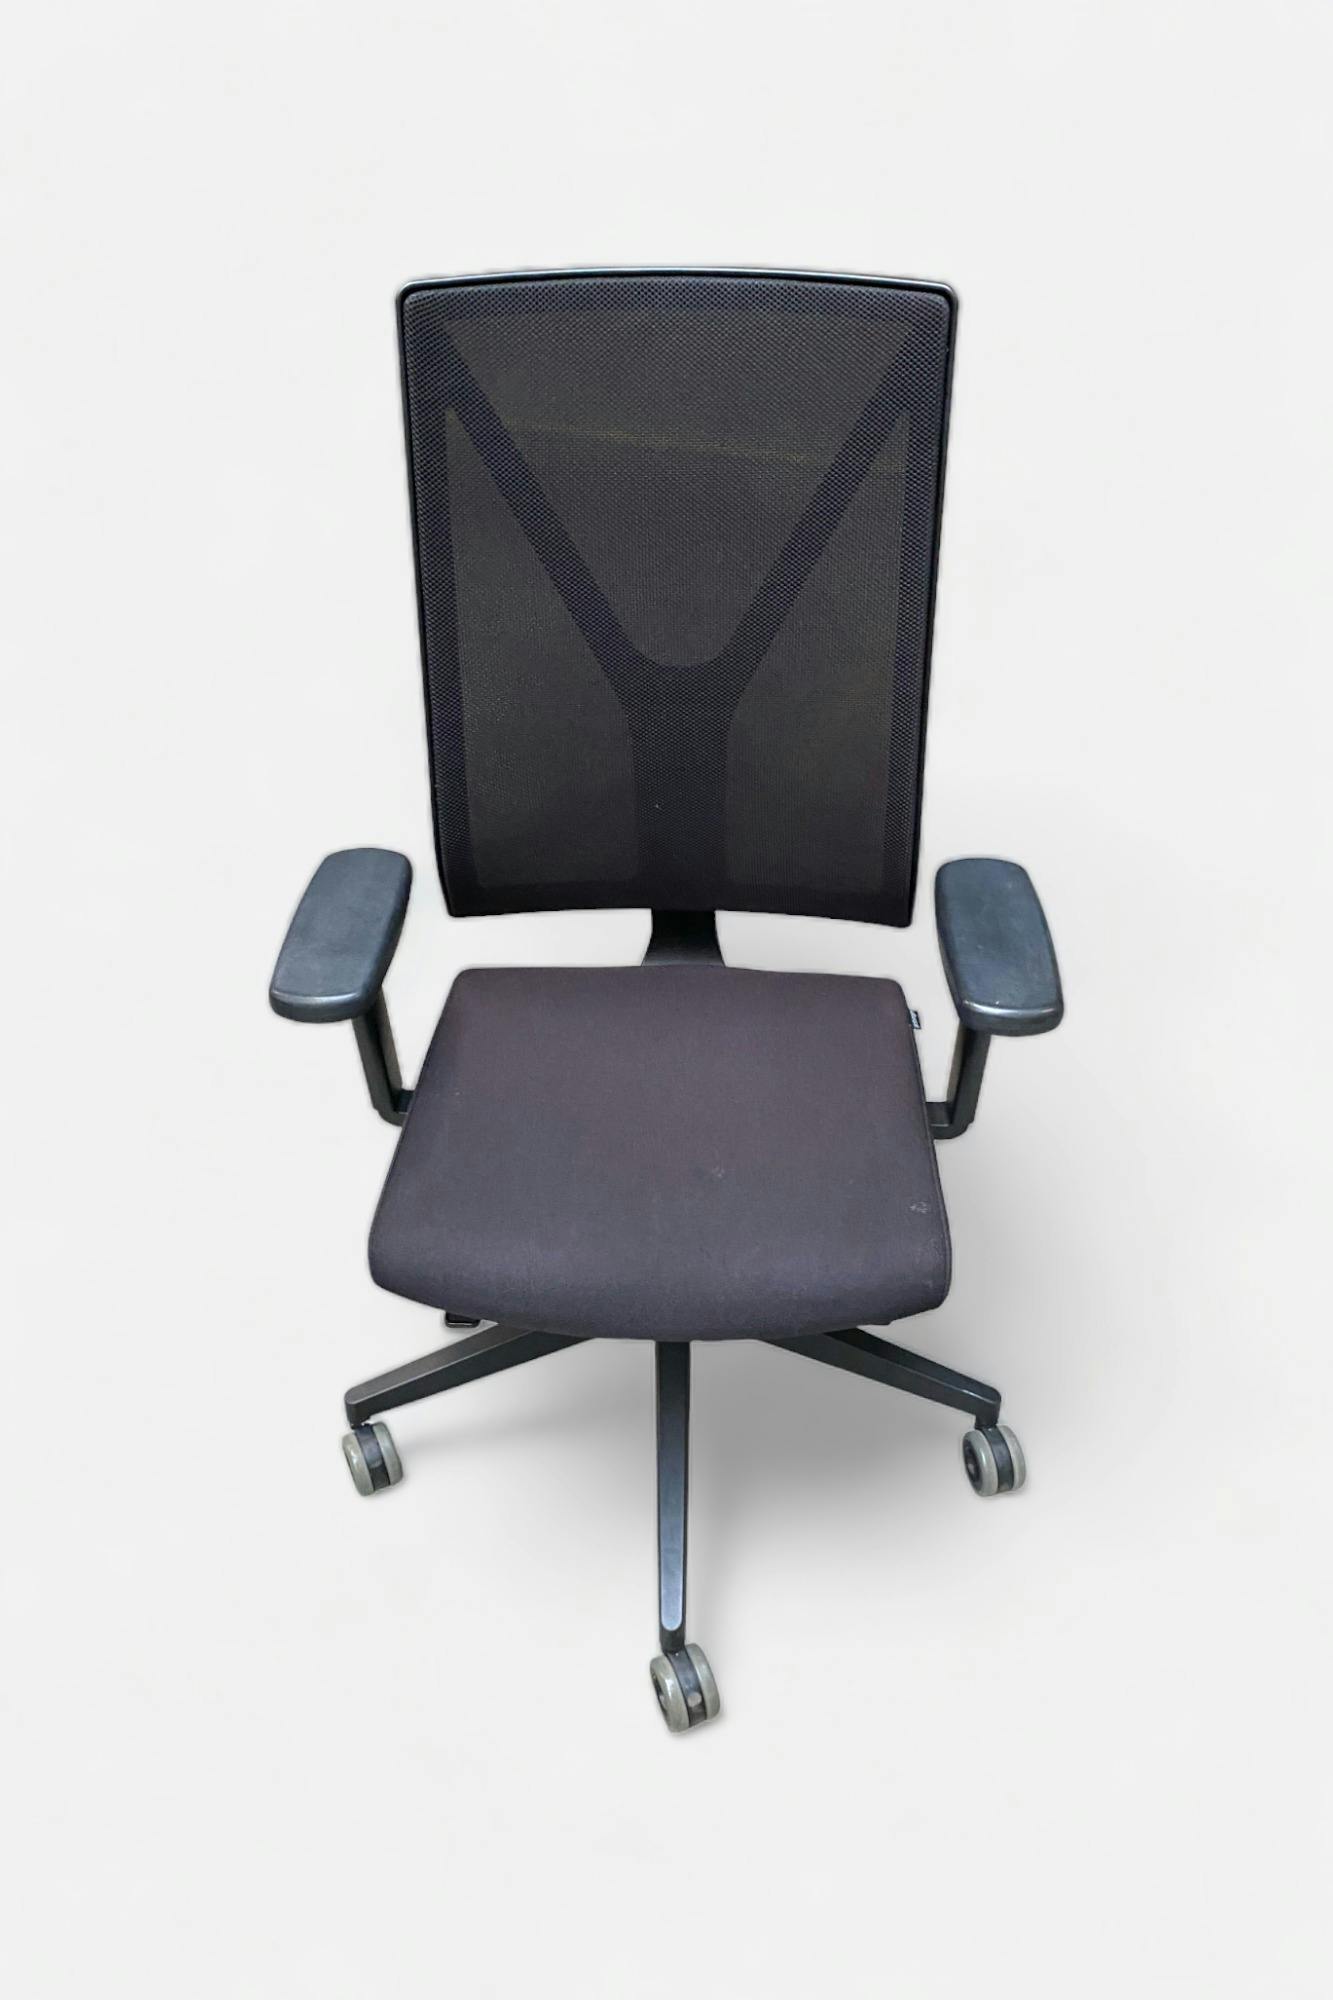 Girsberger black office chair - Second hand quality "Office chairs" - Relieve Furniture